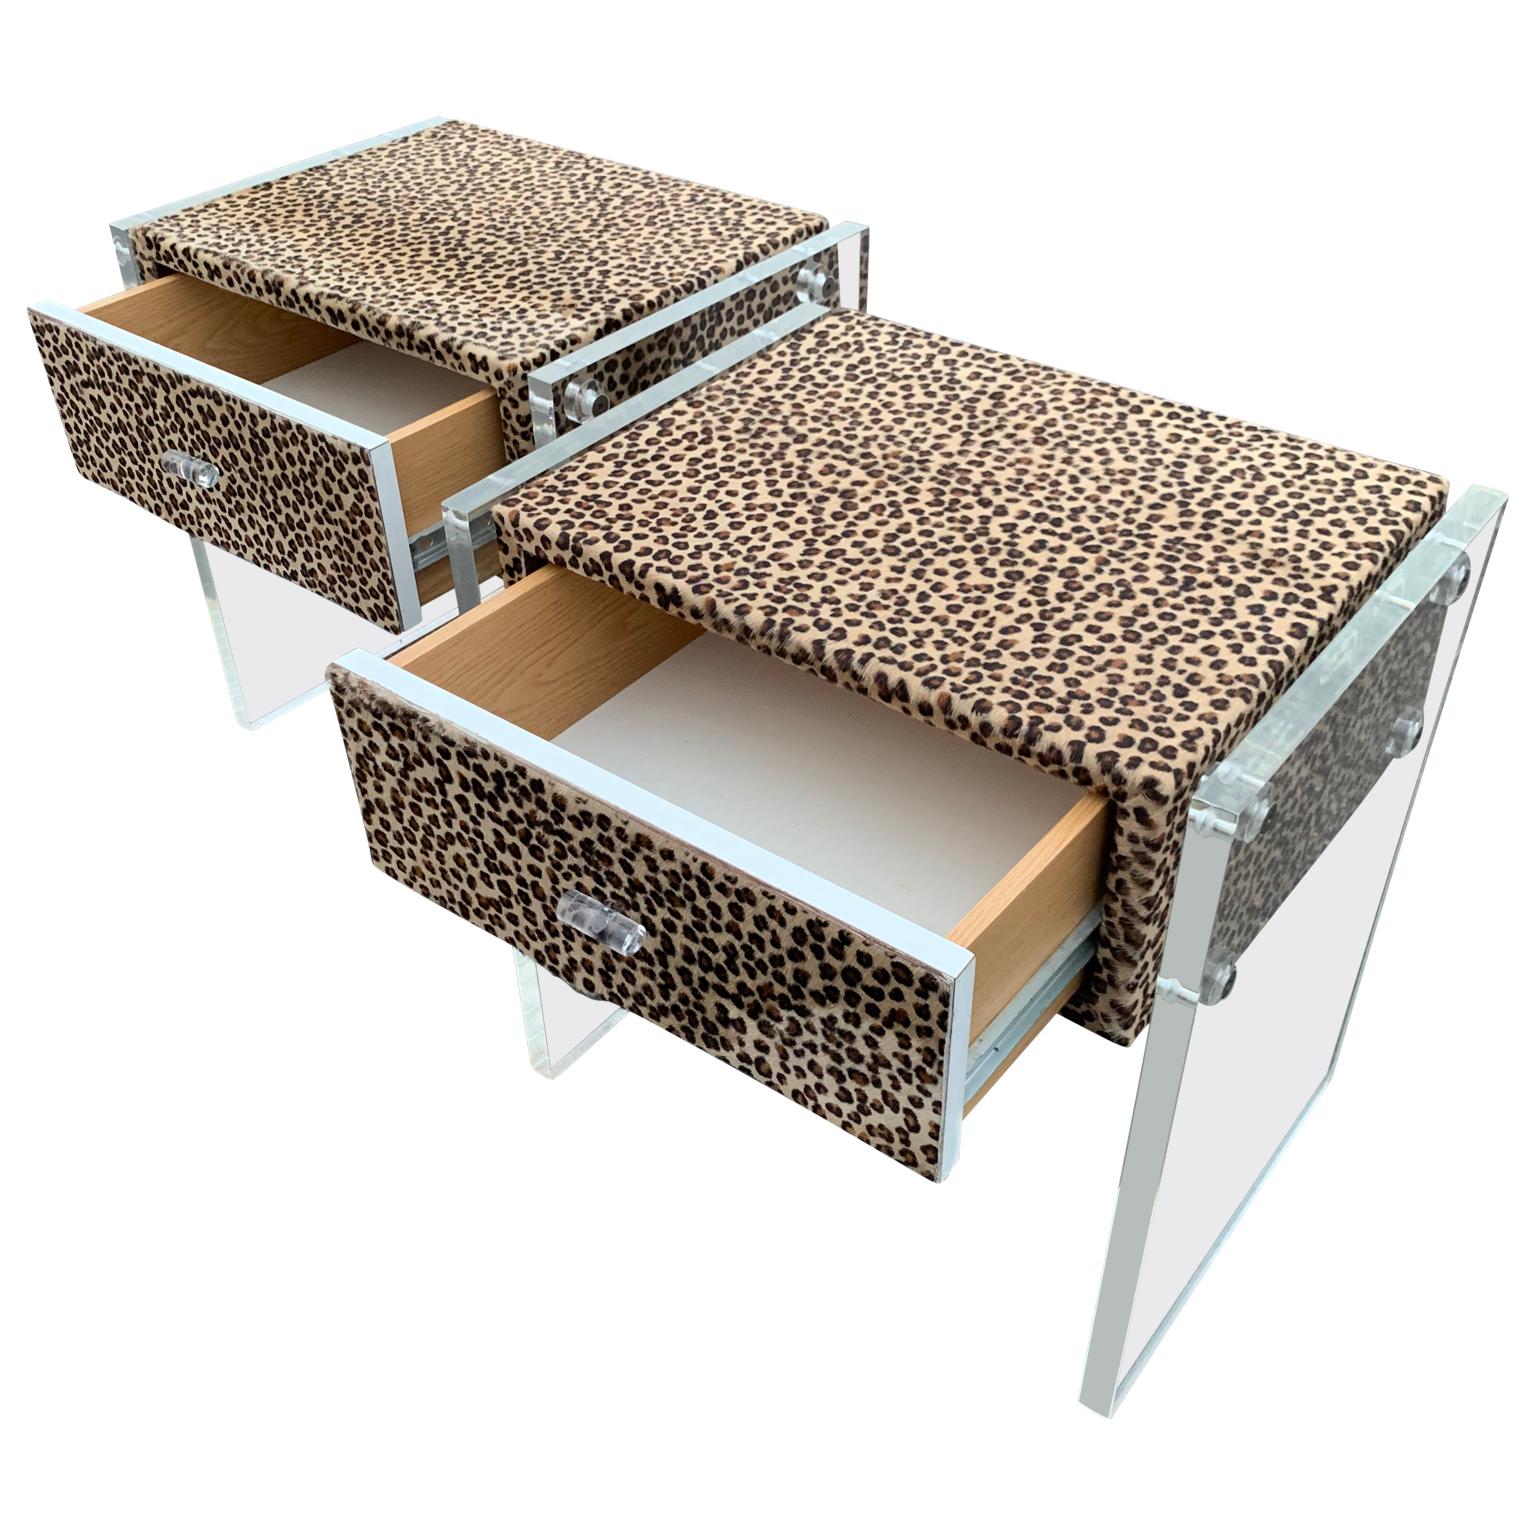 Pair of Faux Cheetah Skin Upholstered Nightstands with Lucite Side Panels 3